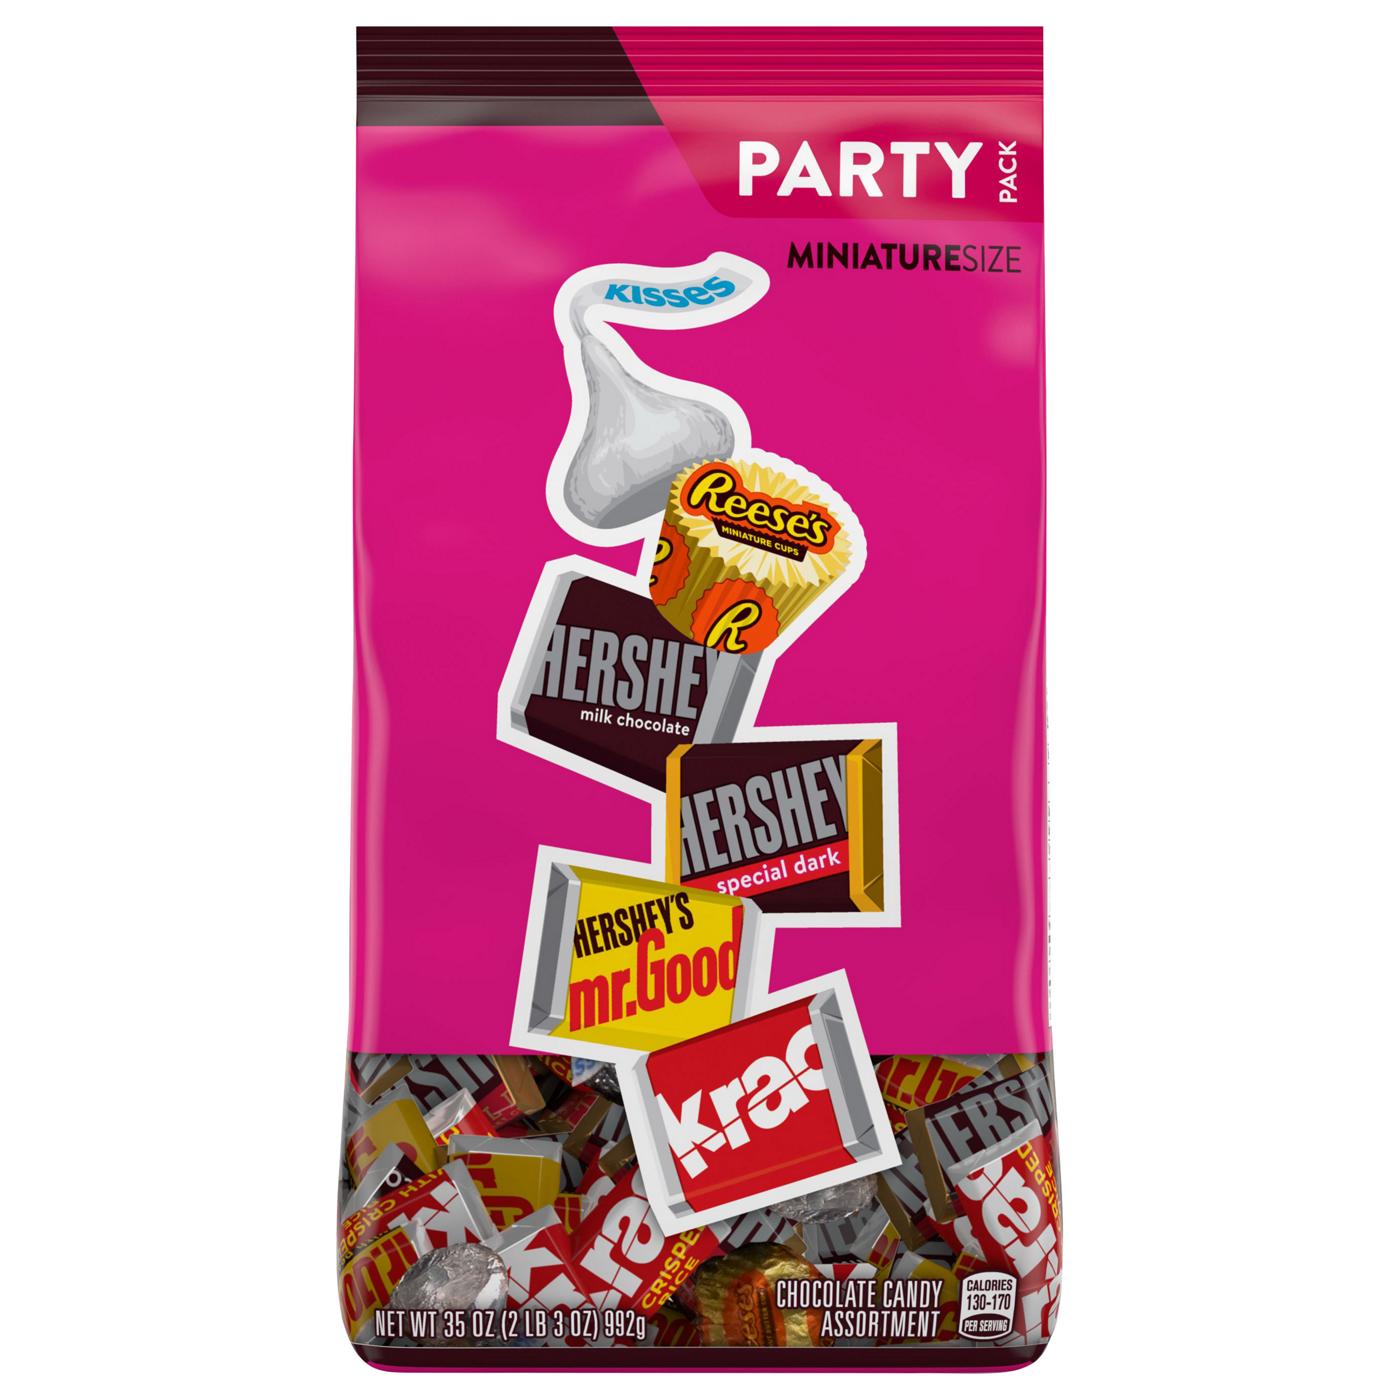 Hershey's Assorted Miniature Candy - Party Pack; image 1 of 8